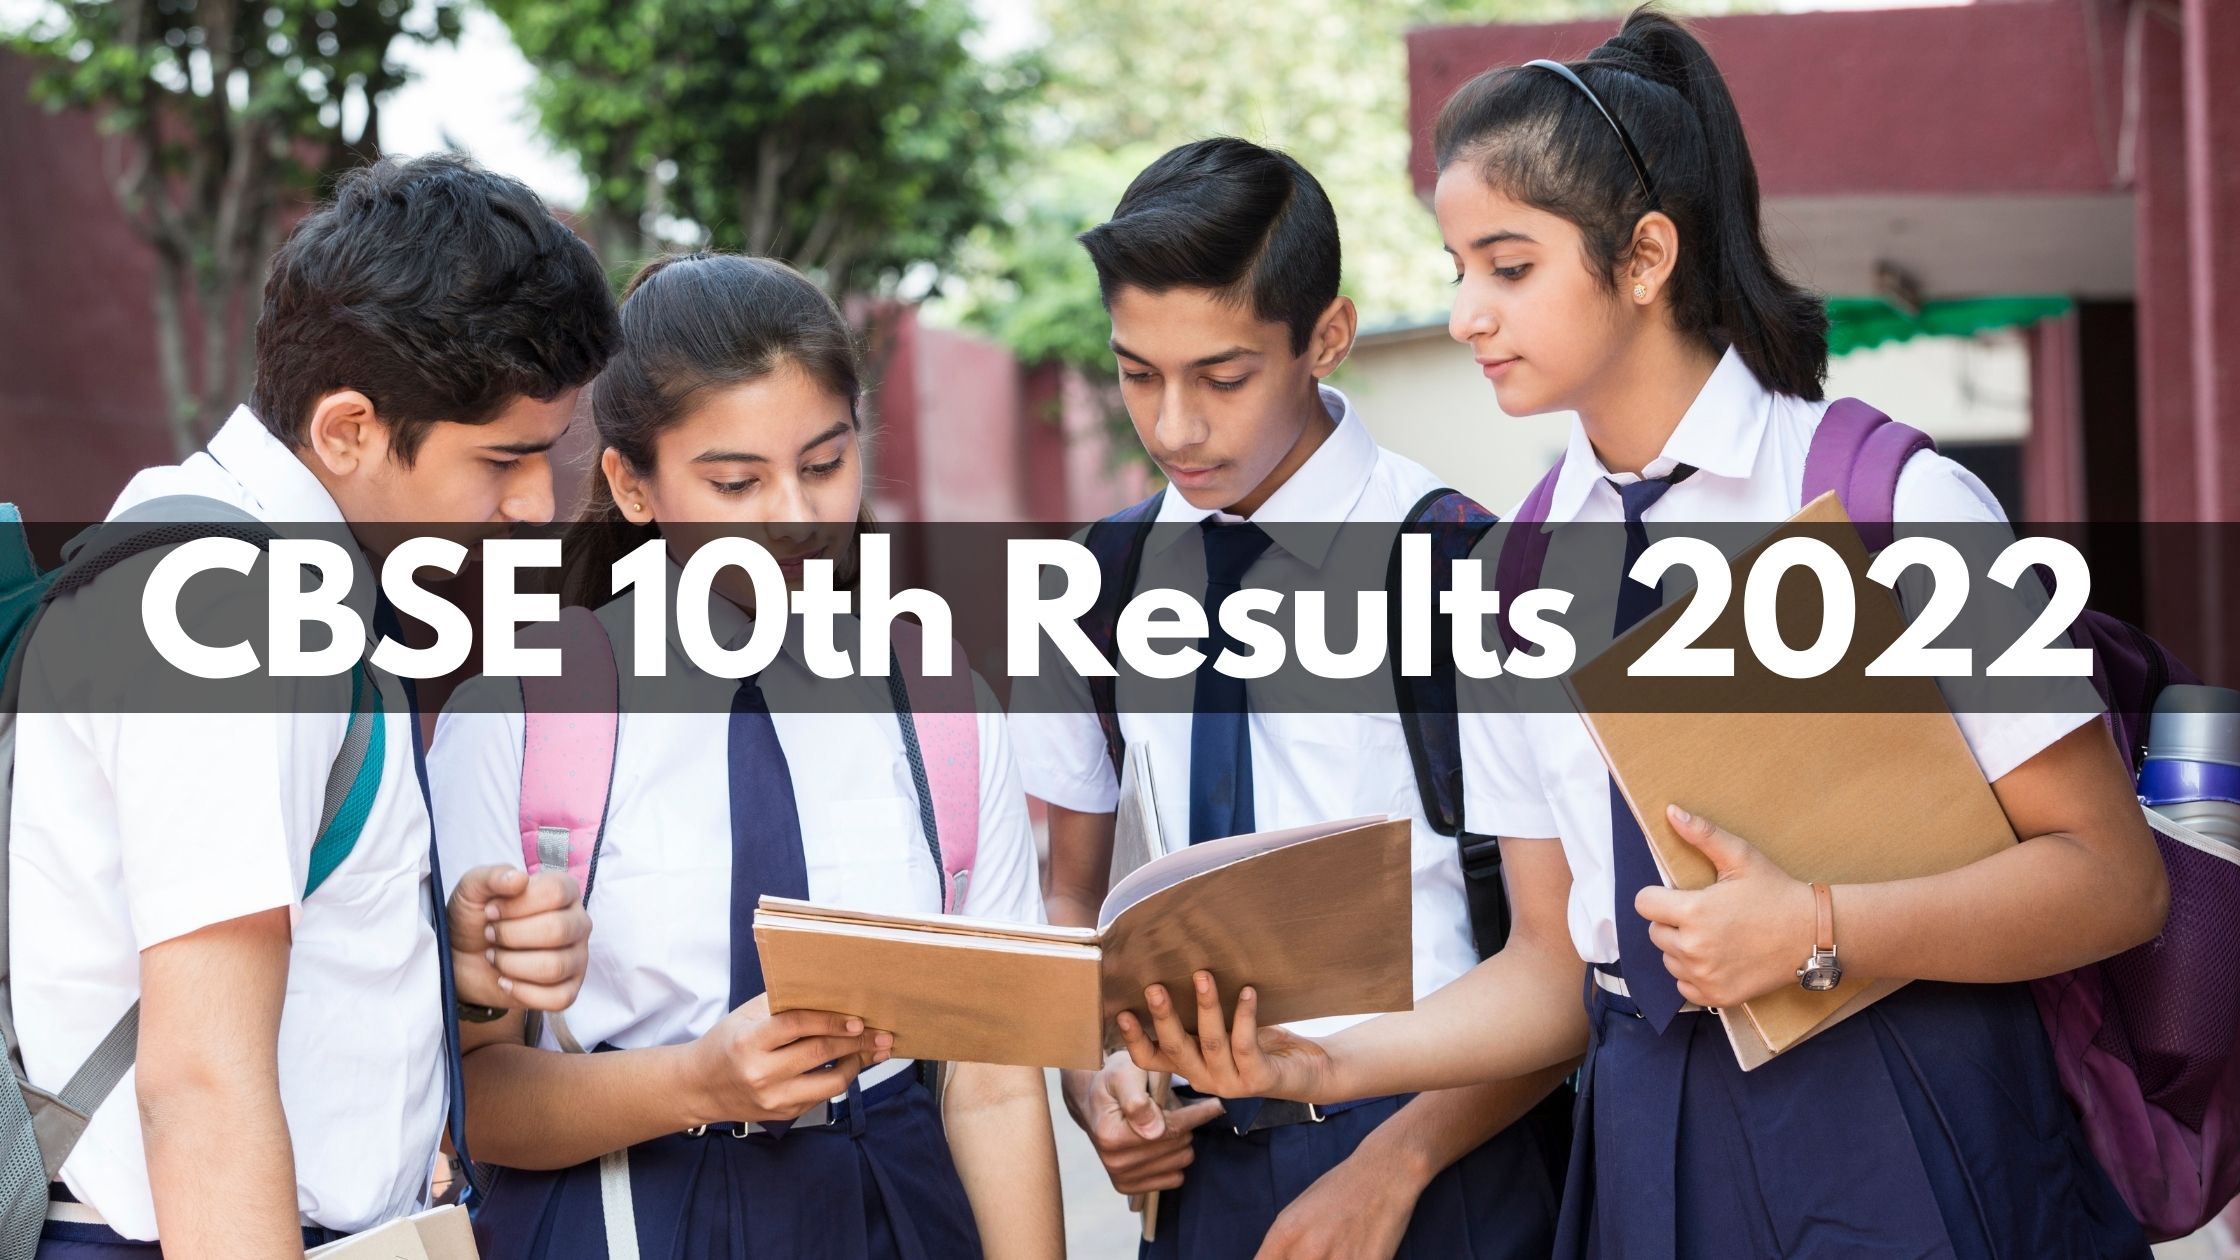 CBSE 10th Results 2022